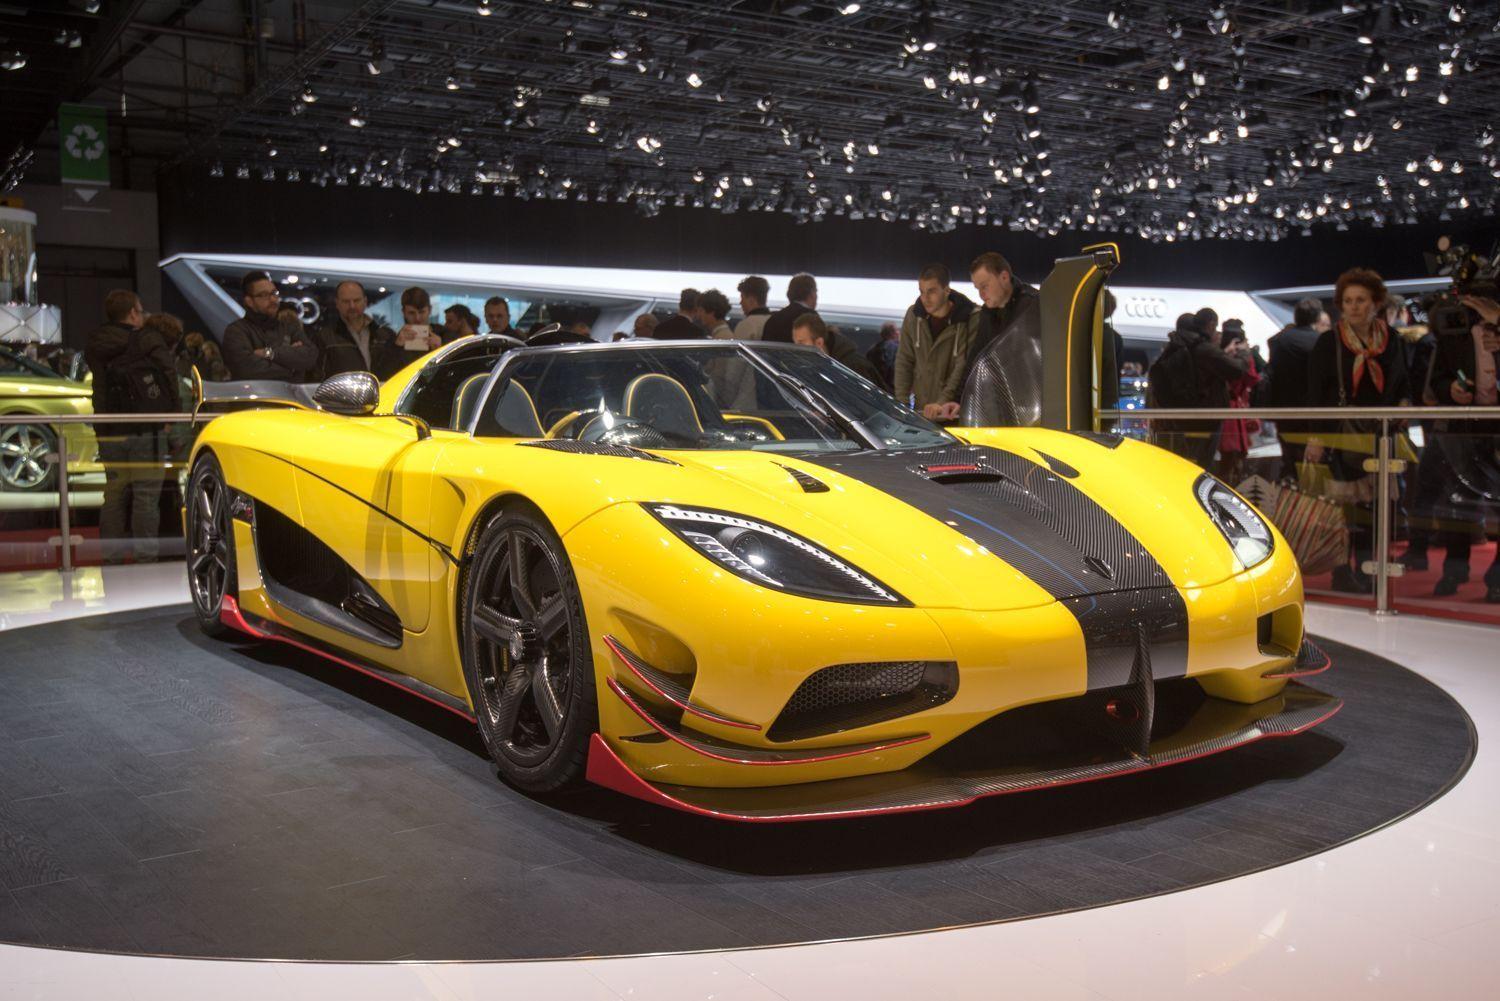 Black And Yellow Agera R Wallpapers Top Free Black And